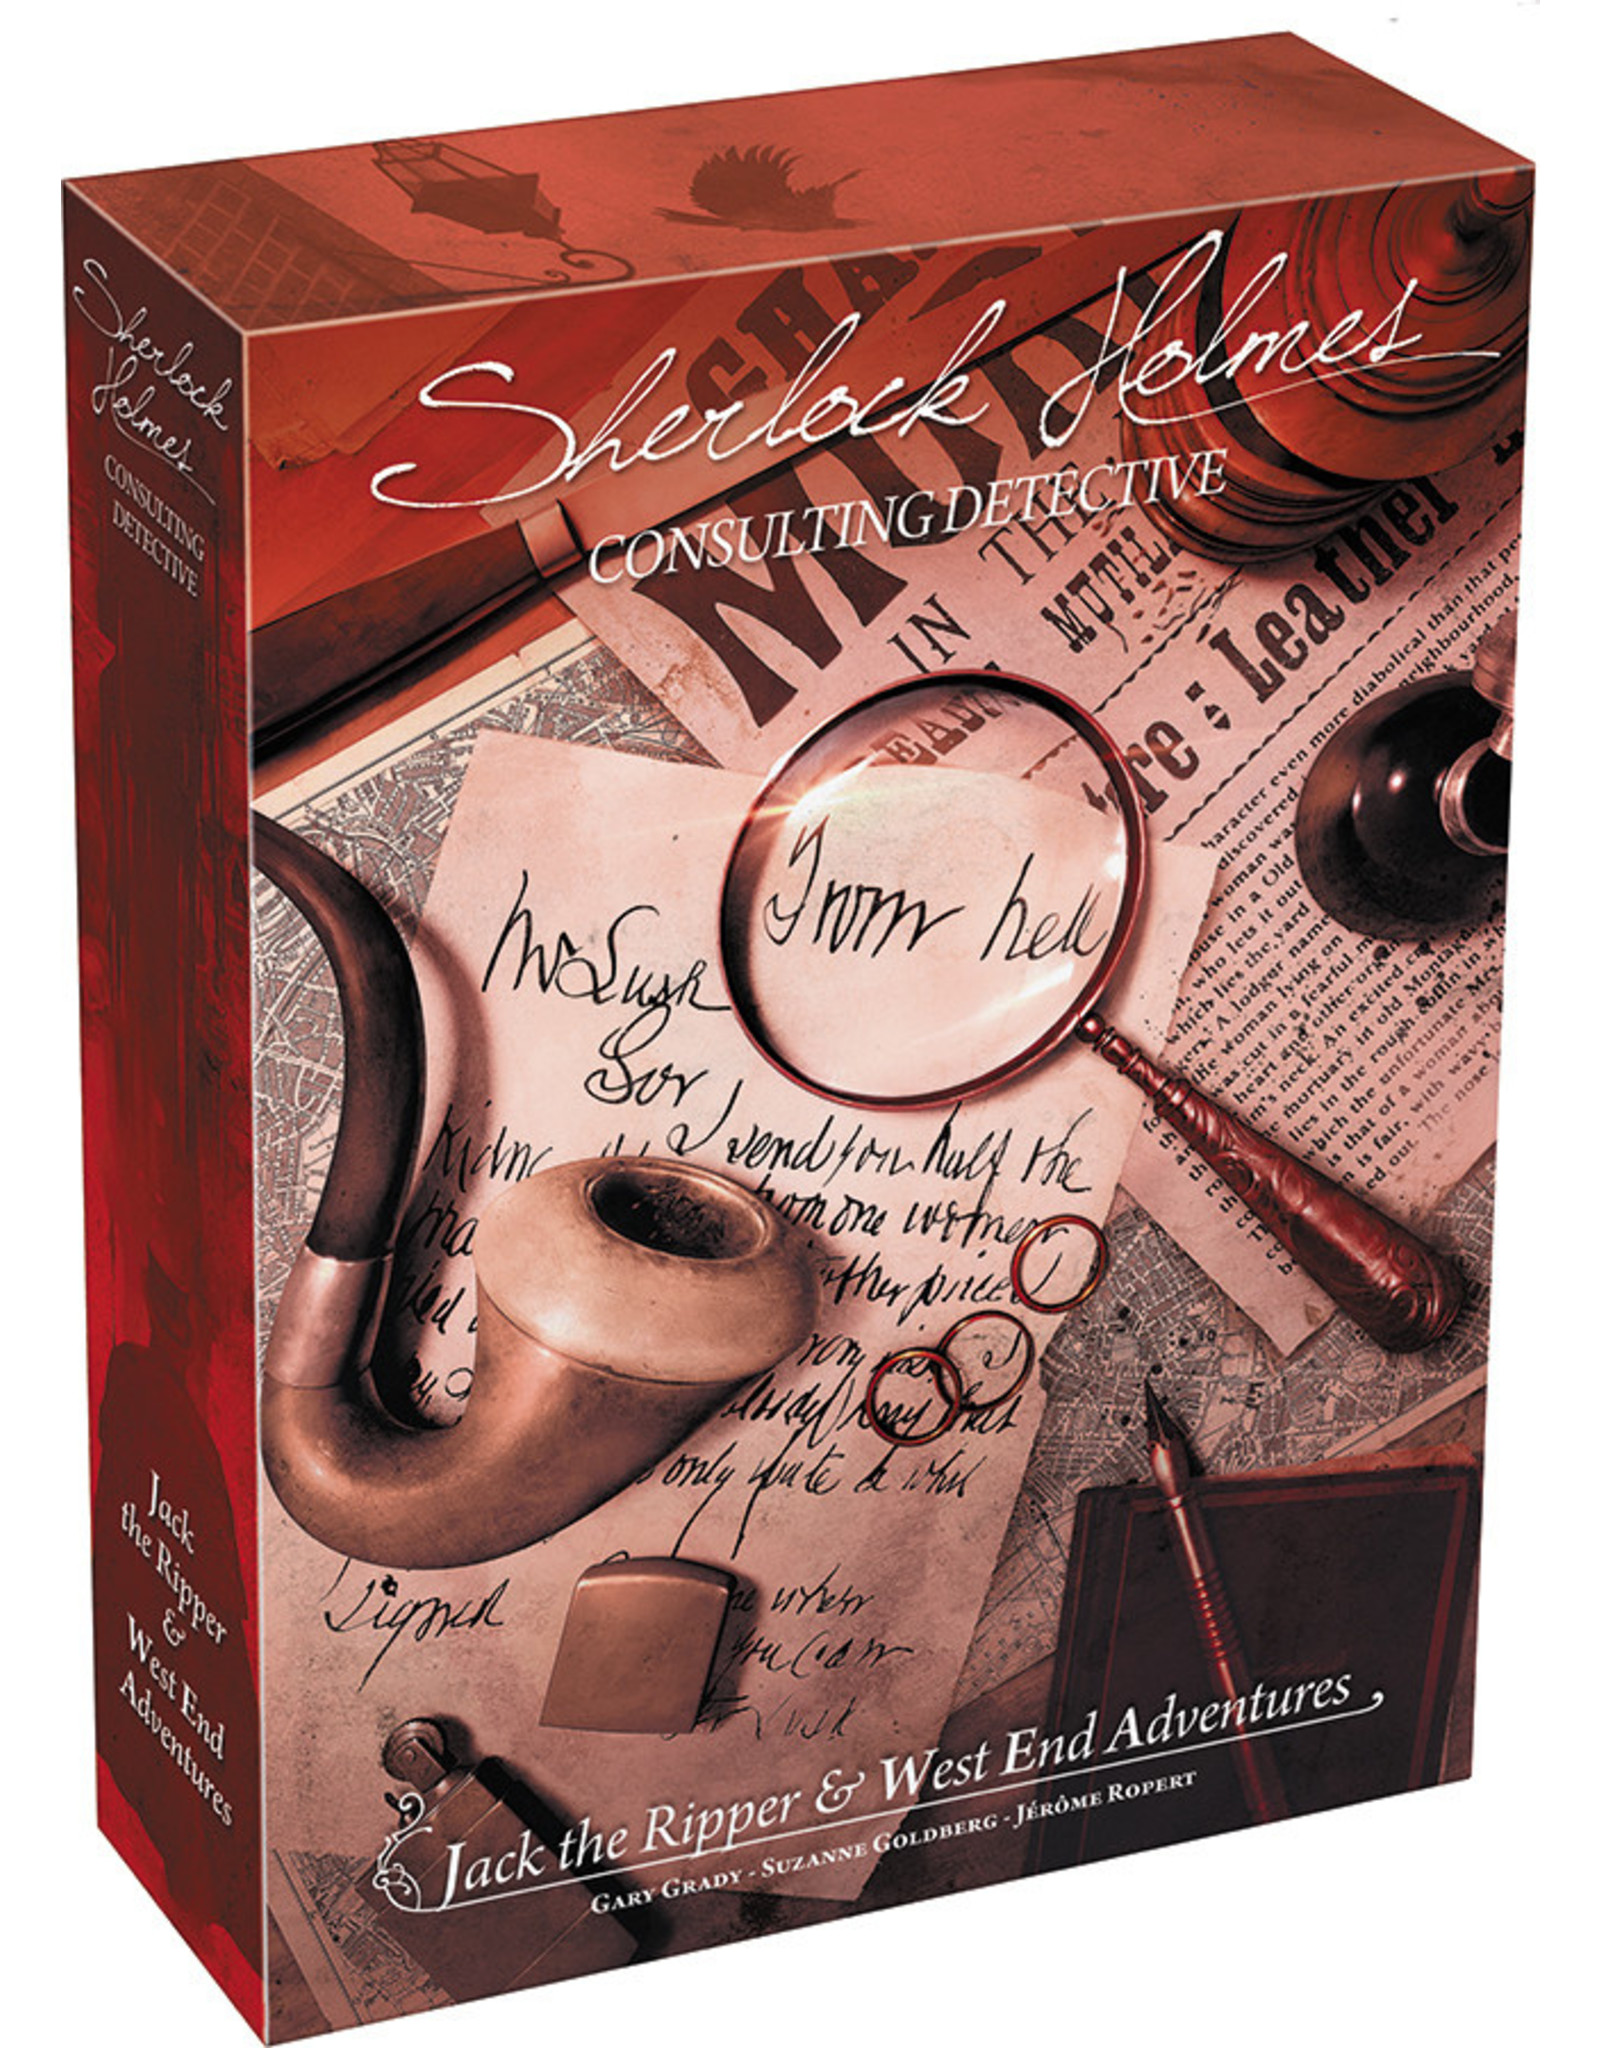 Sherlock Holmes Consulting Detective JTR and West End Adv